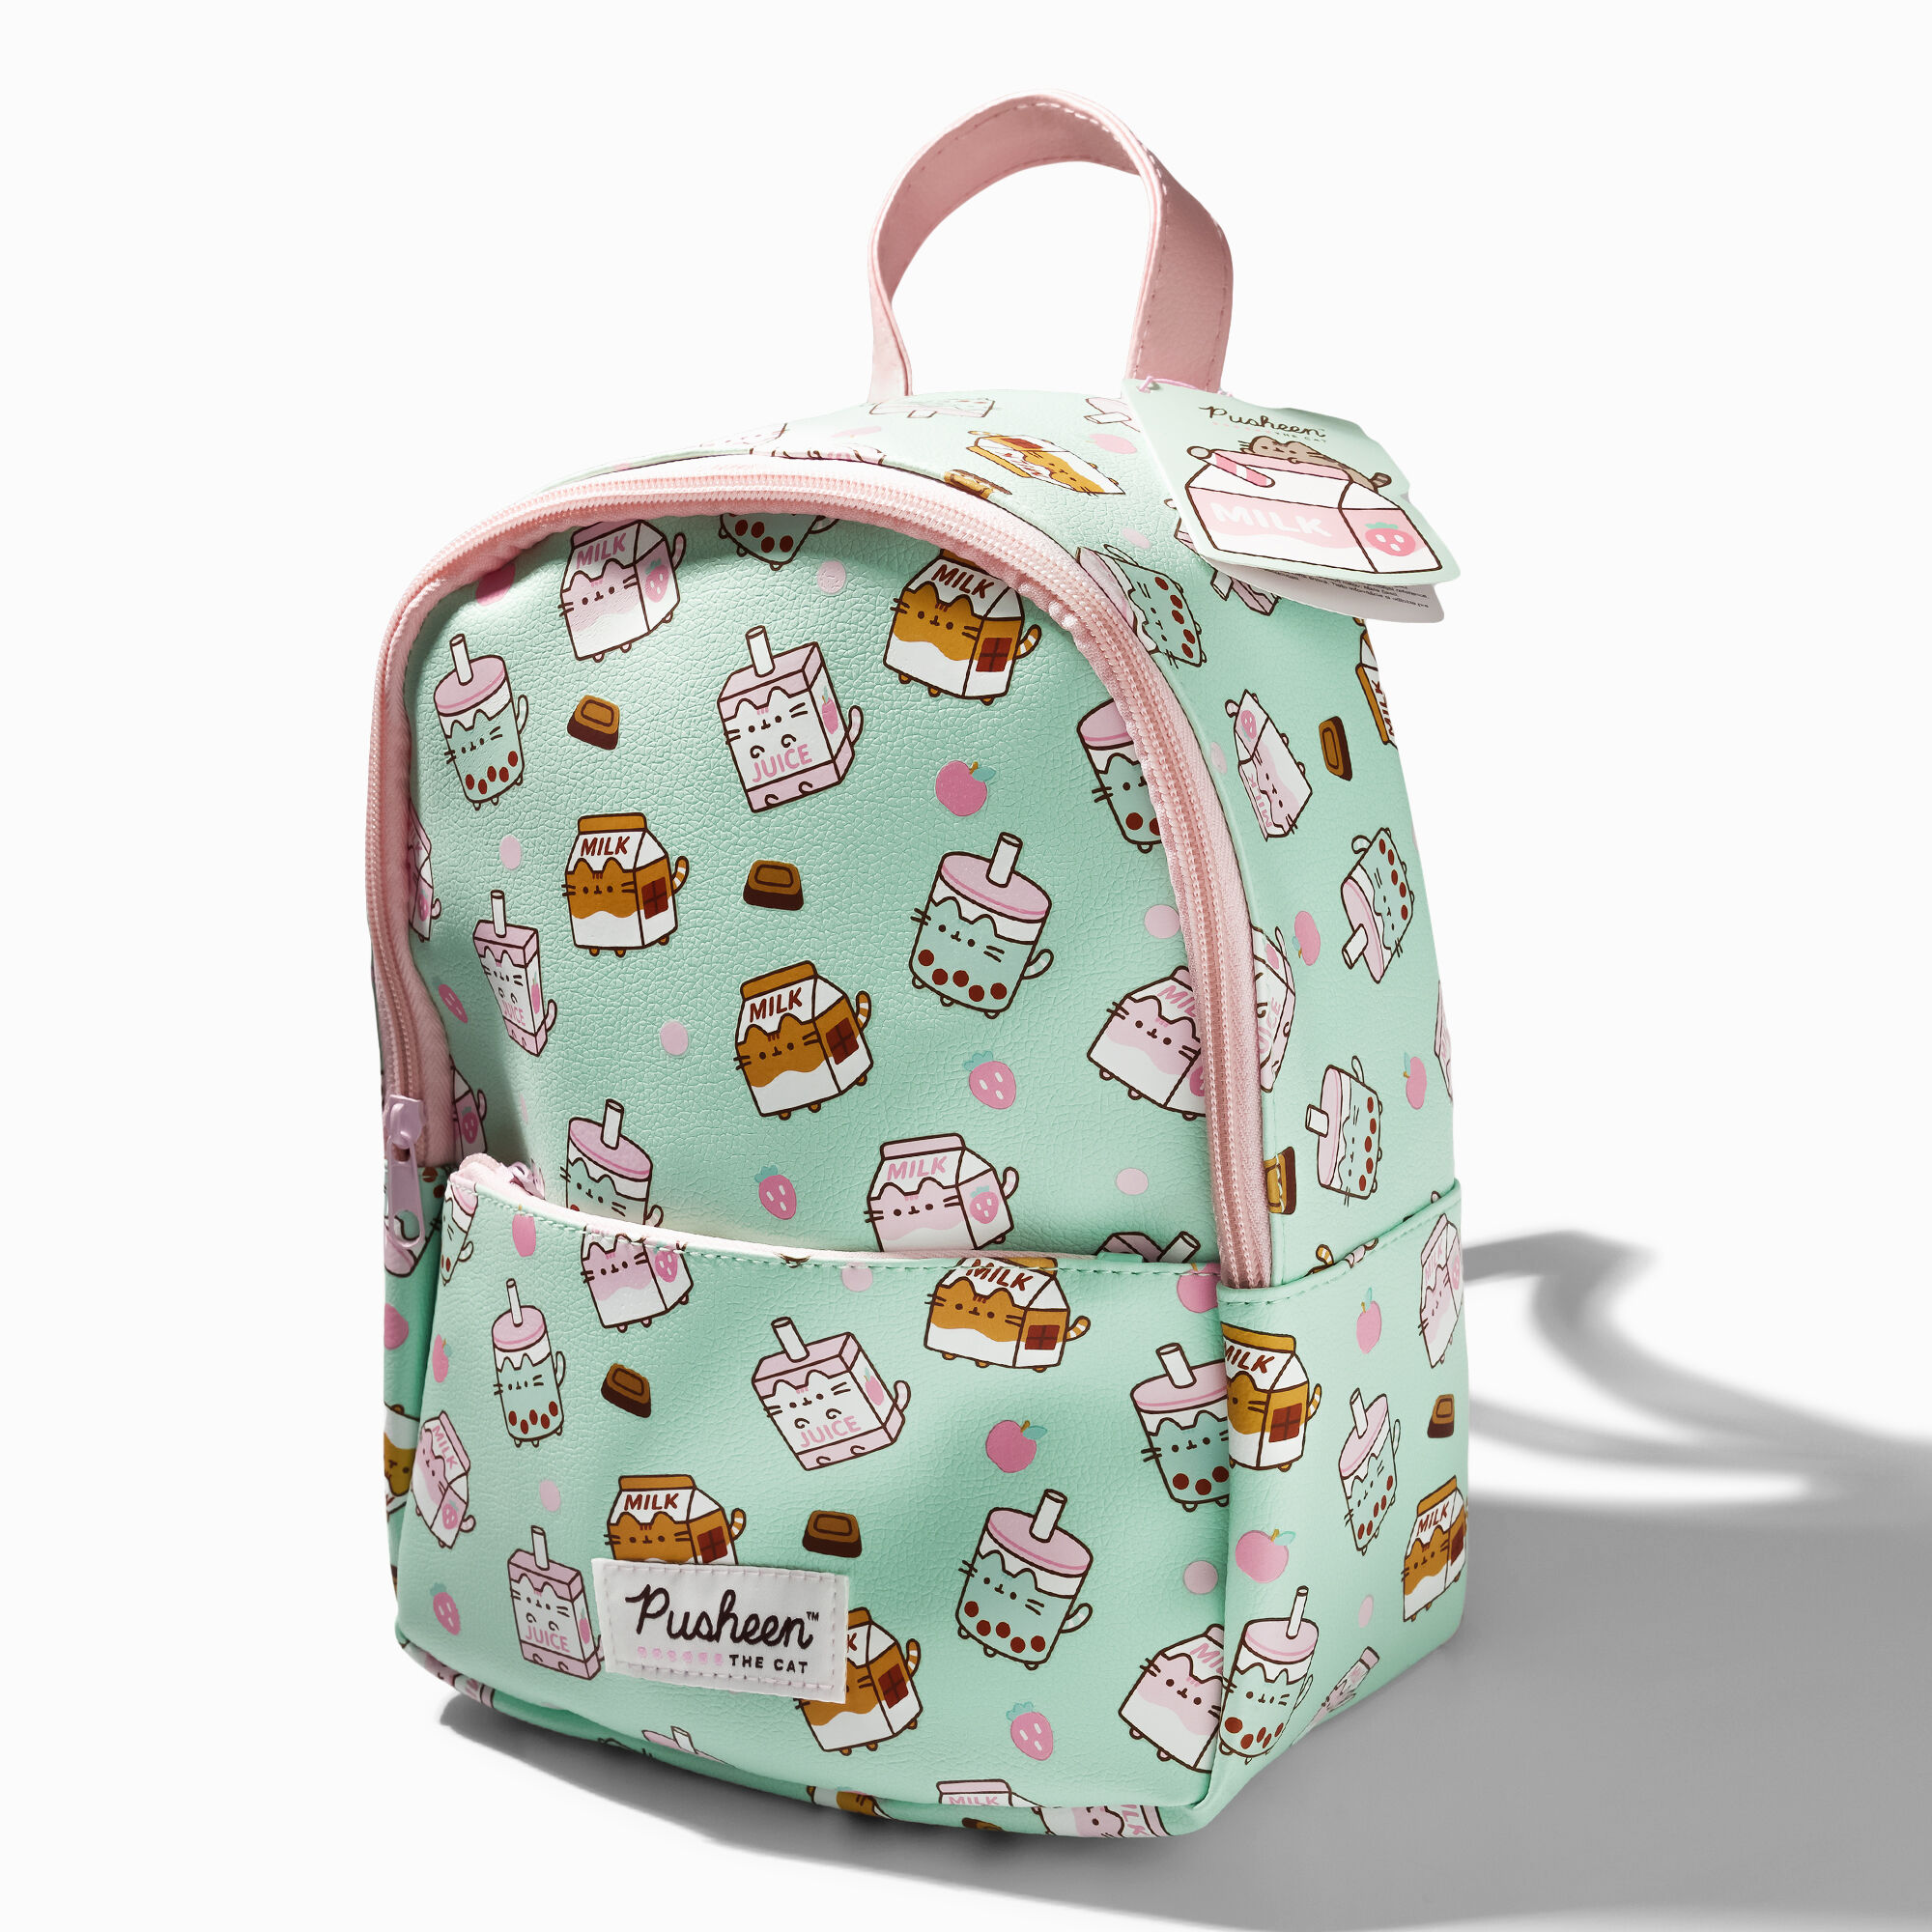 View Claires Pusheen Milk Mini Backpack Mint information